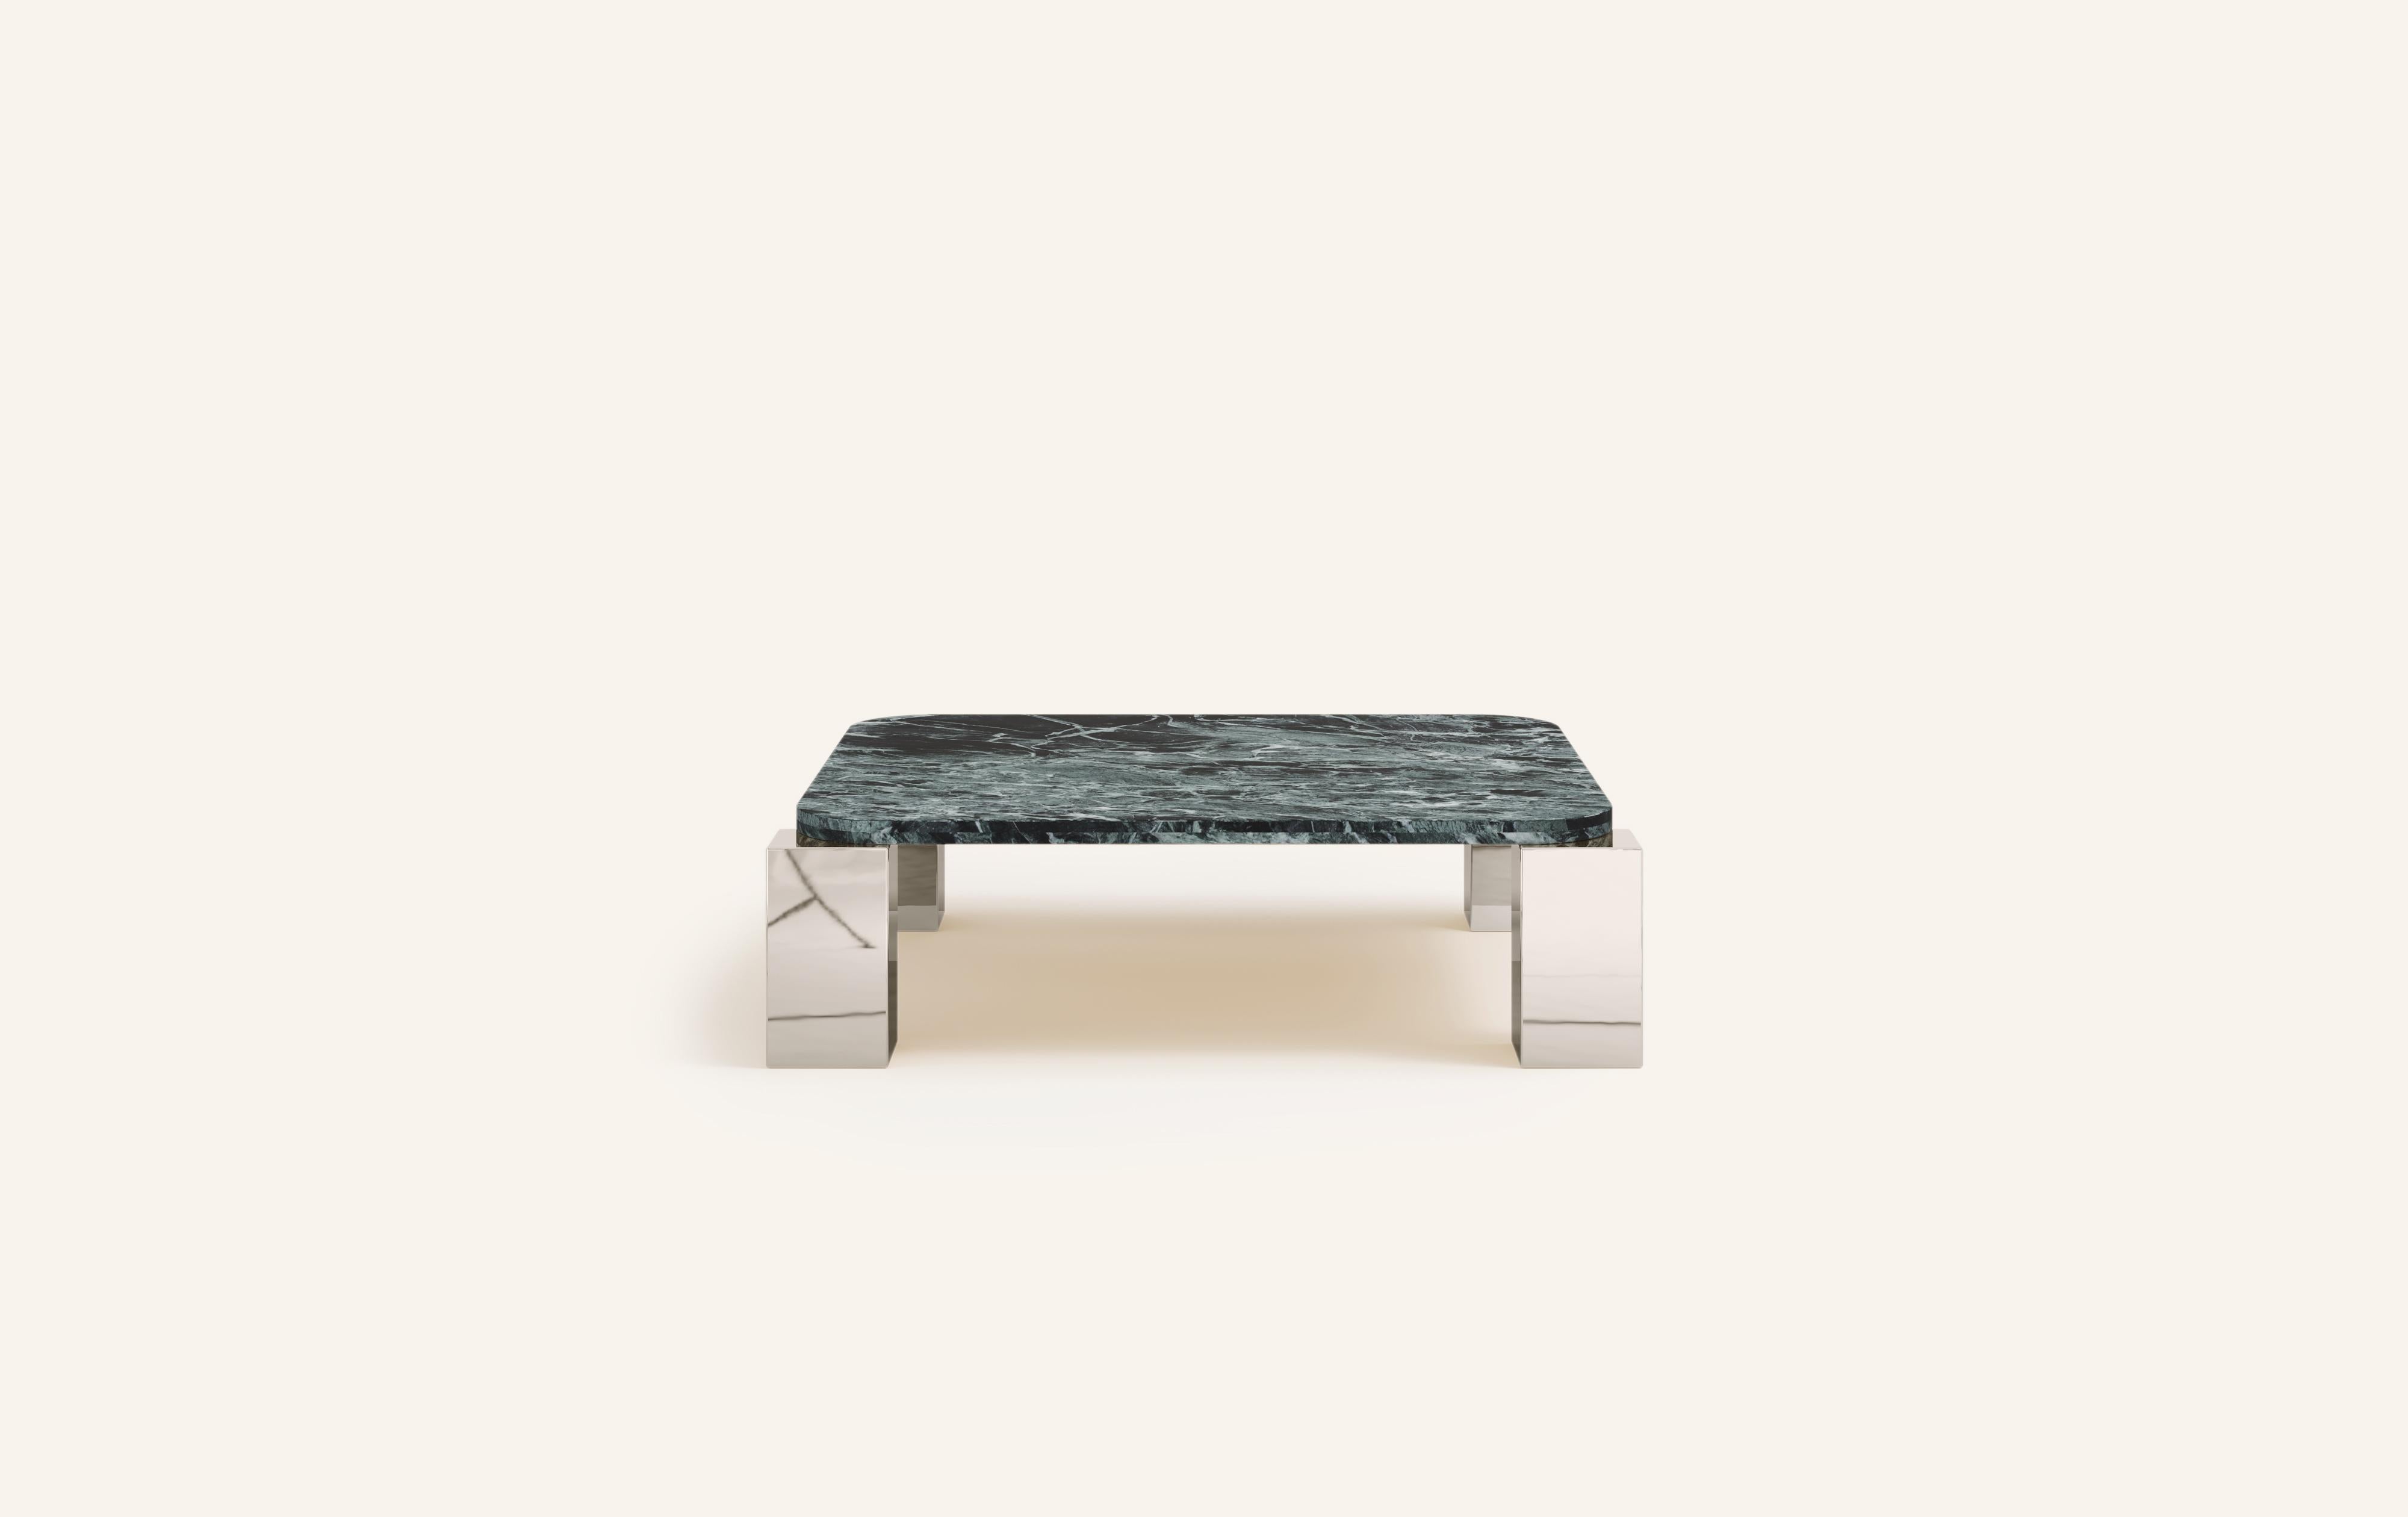 MONOLITHIC FORMS SOFTENED BY GENTLE EDGES. WITH ITS BOLD MARBLE PATTERNS CUBO IS AS VERSATILE AS IT IS STRIKING.

DIMENSIONS:
56”L x 56”W x 14”H: 
- 54”L x 54”W x 1.5” THICK TABLETOP WITH WITH 6